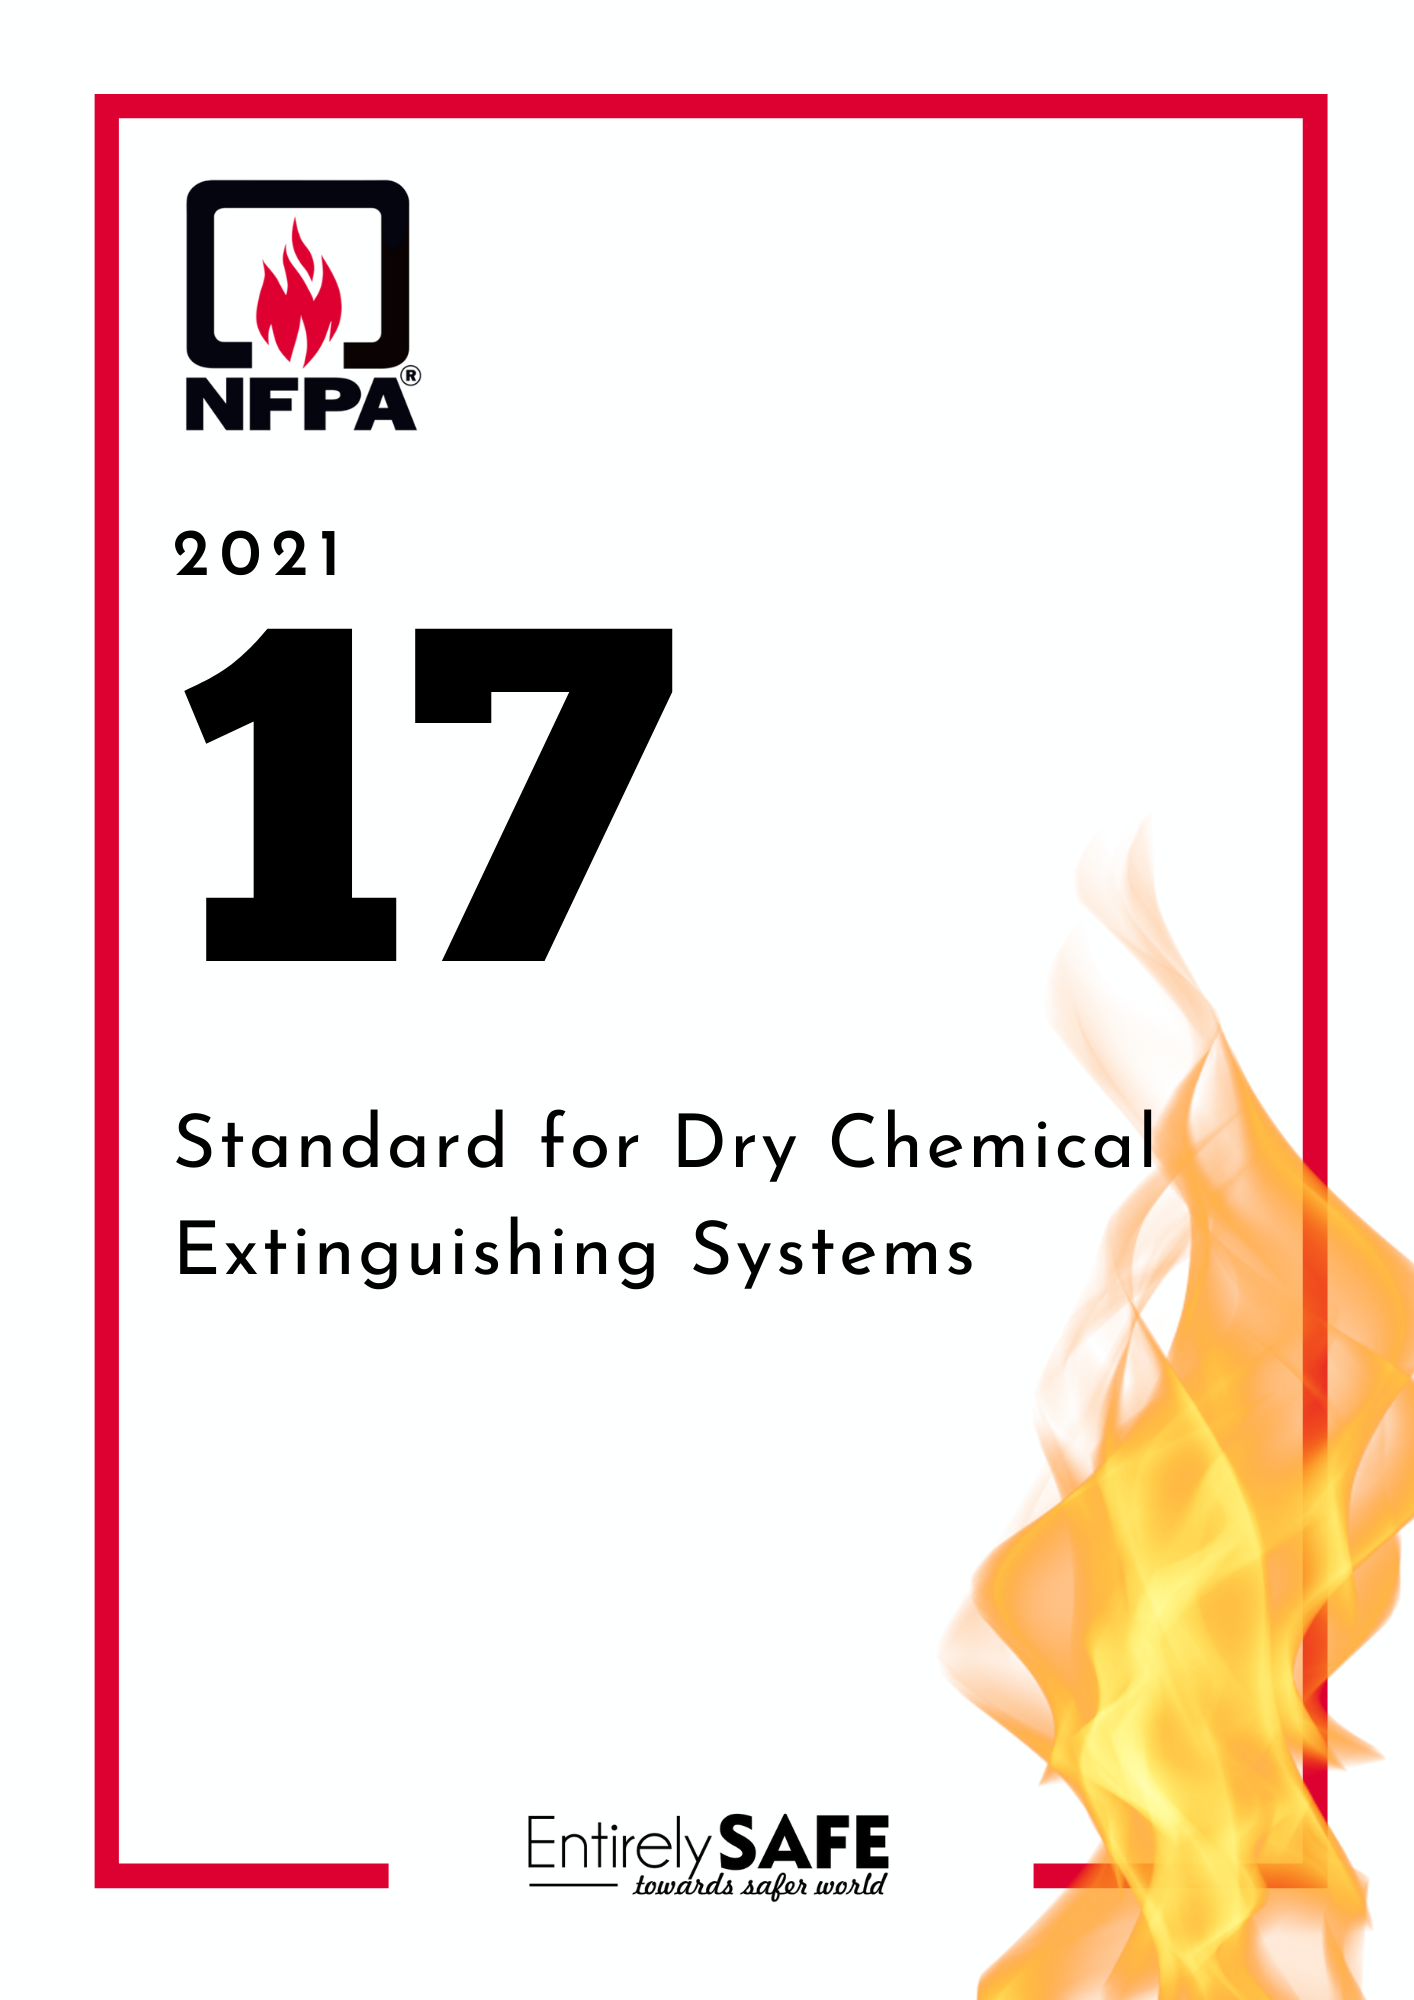 #120-NFPA-Dry-Chemical-Extinguishing-systems-standards